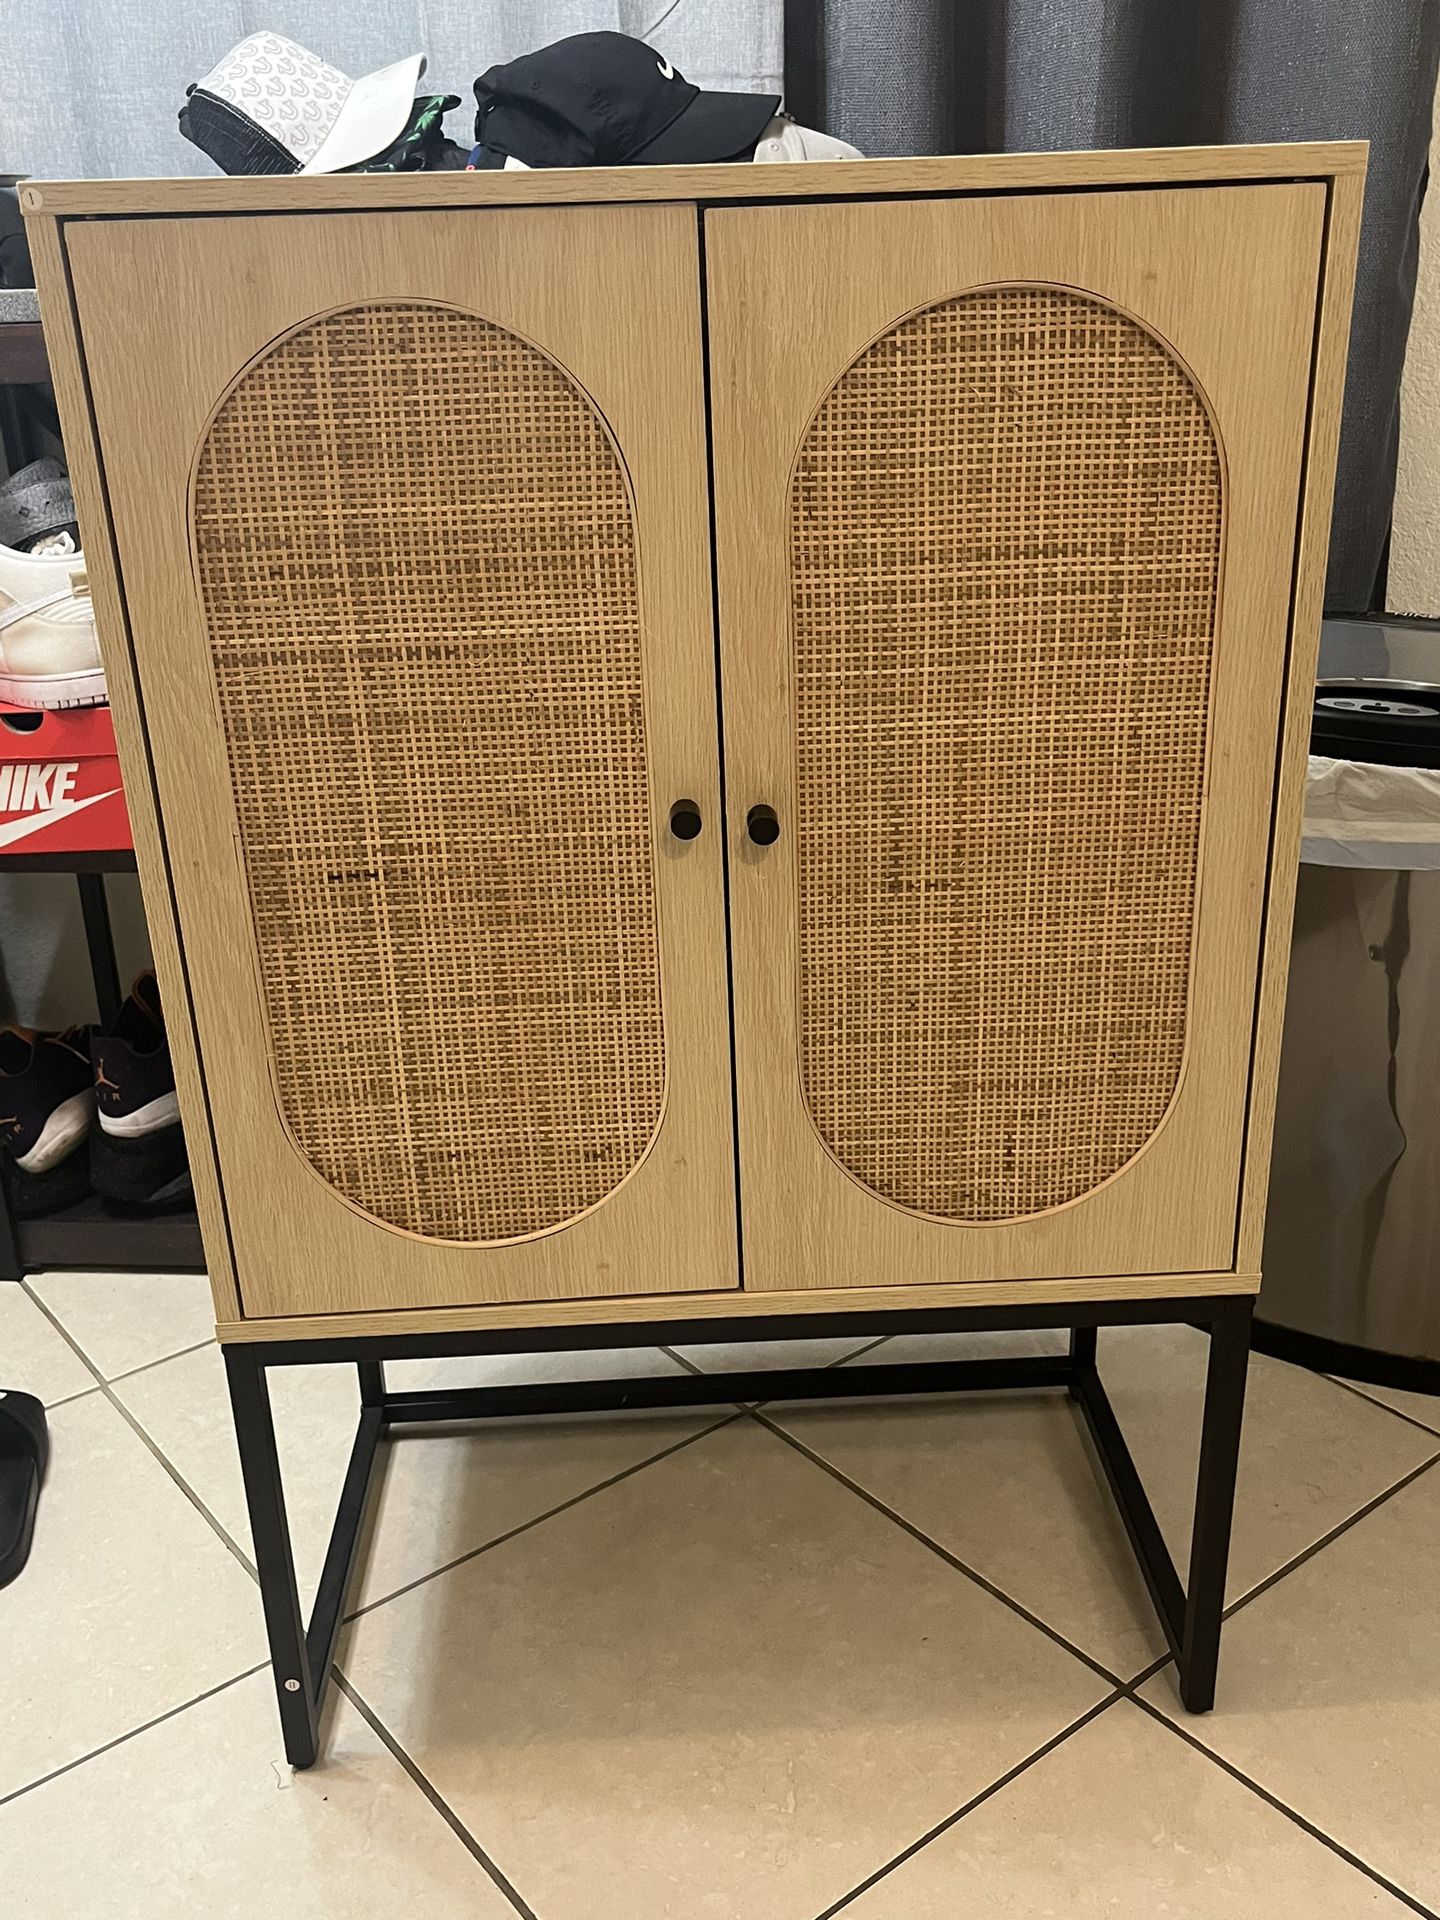 $30 Wood Cabinet With Shelf Inside, Need Picked Up Asap